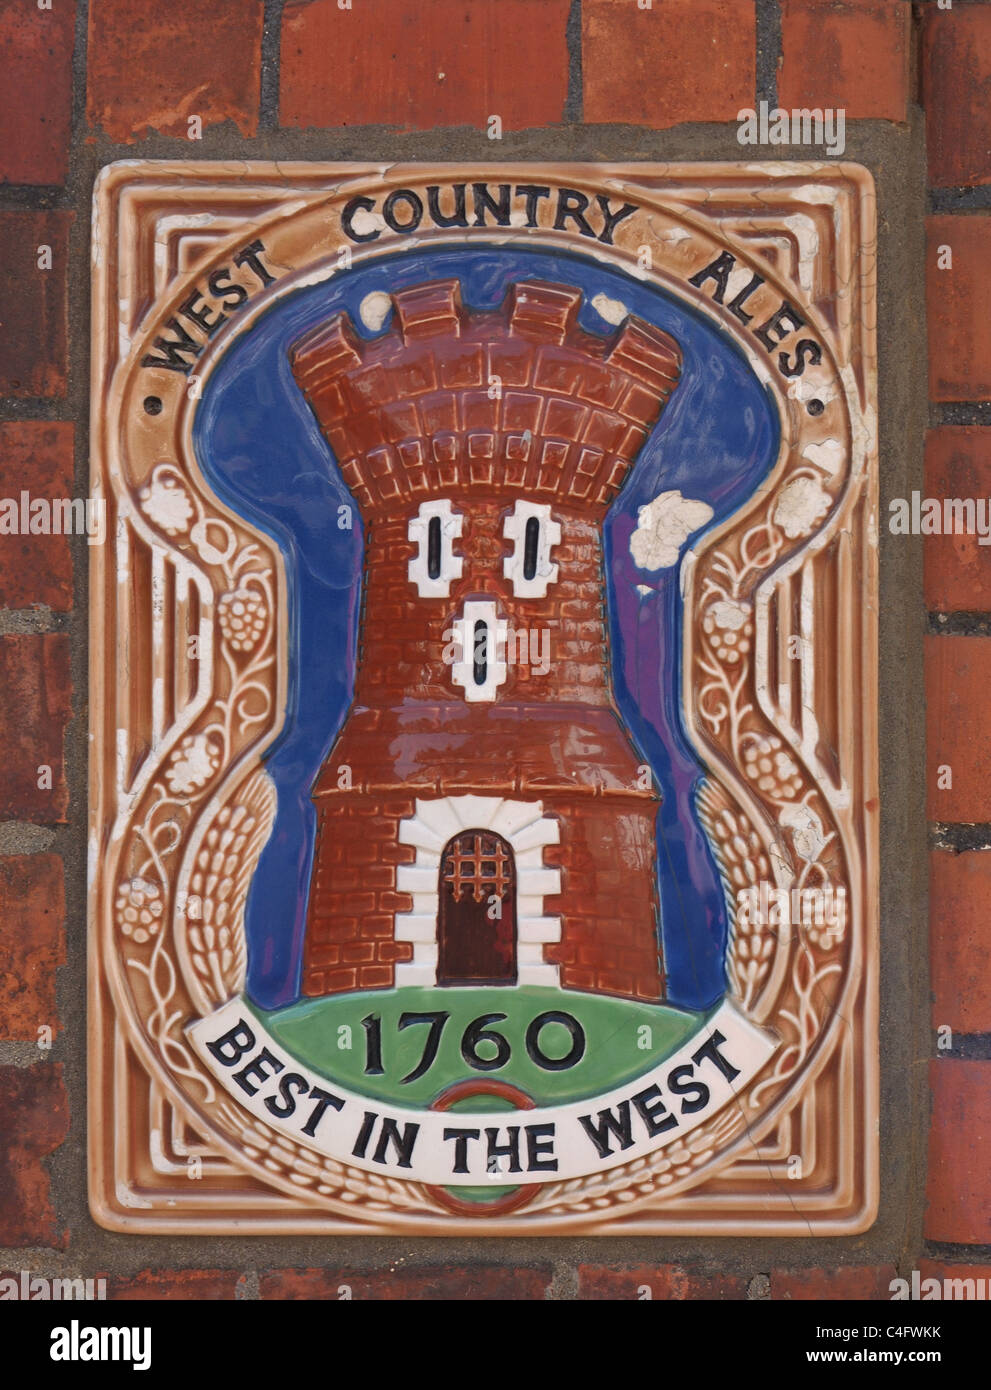 West Country Ales ceramic brewery plaque Stock Photo